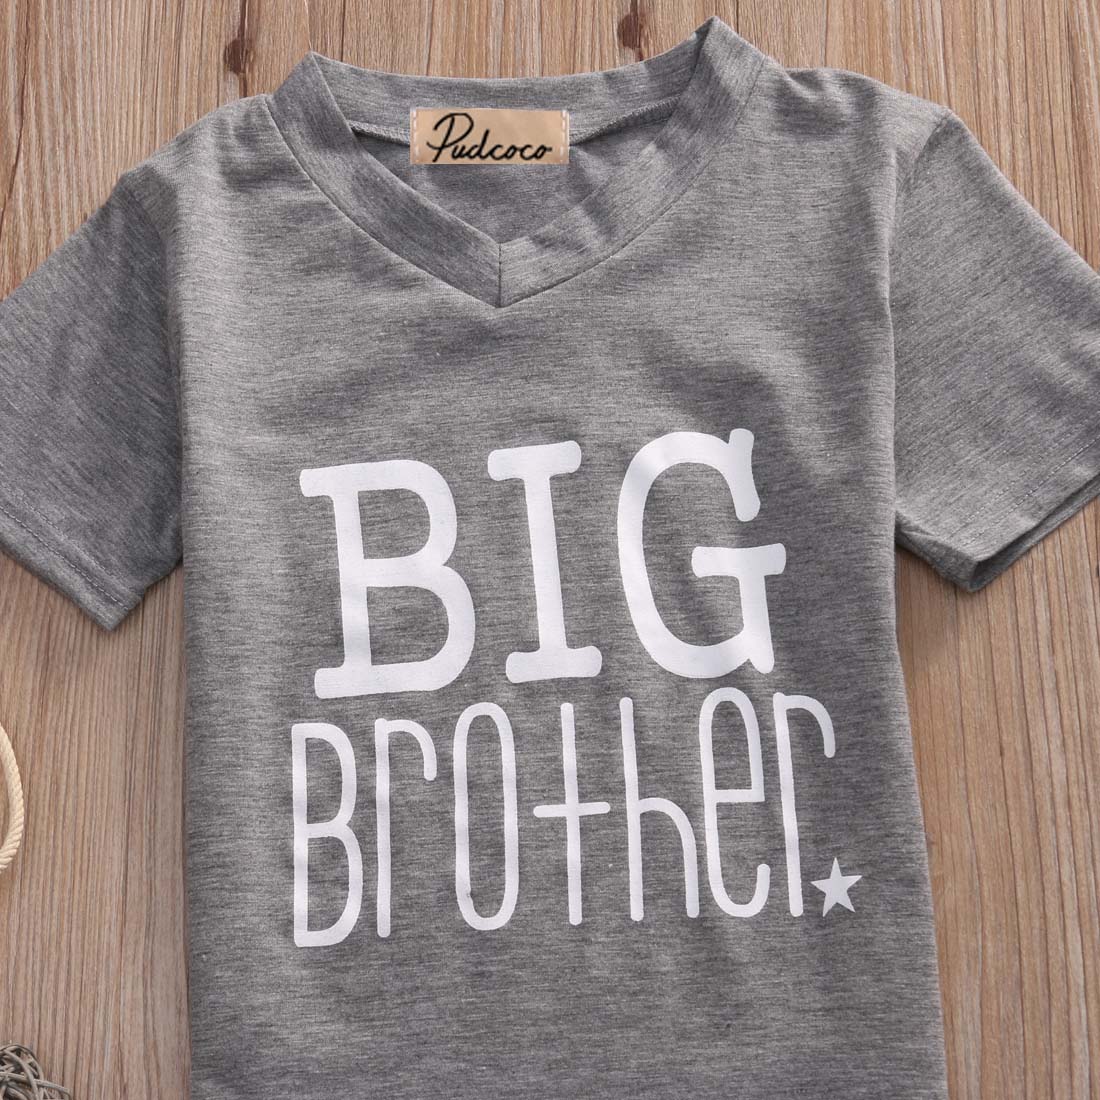 Summer Children Clothing T-shirt  Big Brother Sleeve Cotton Cotton Baby Boy T-shirt Tops Clothes Outfits - ebowsos